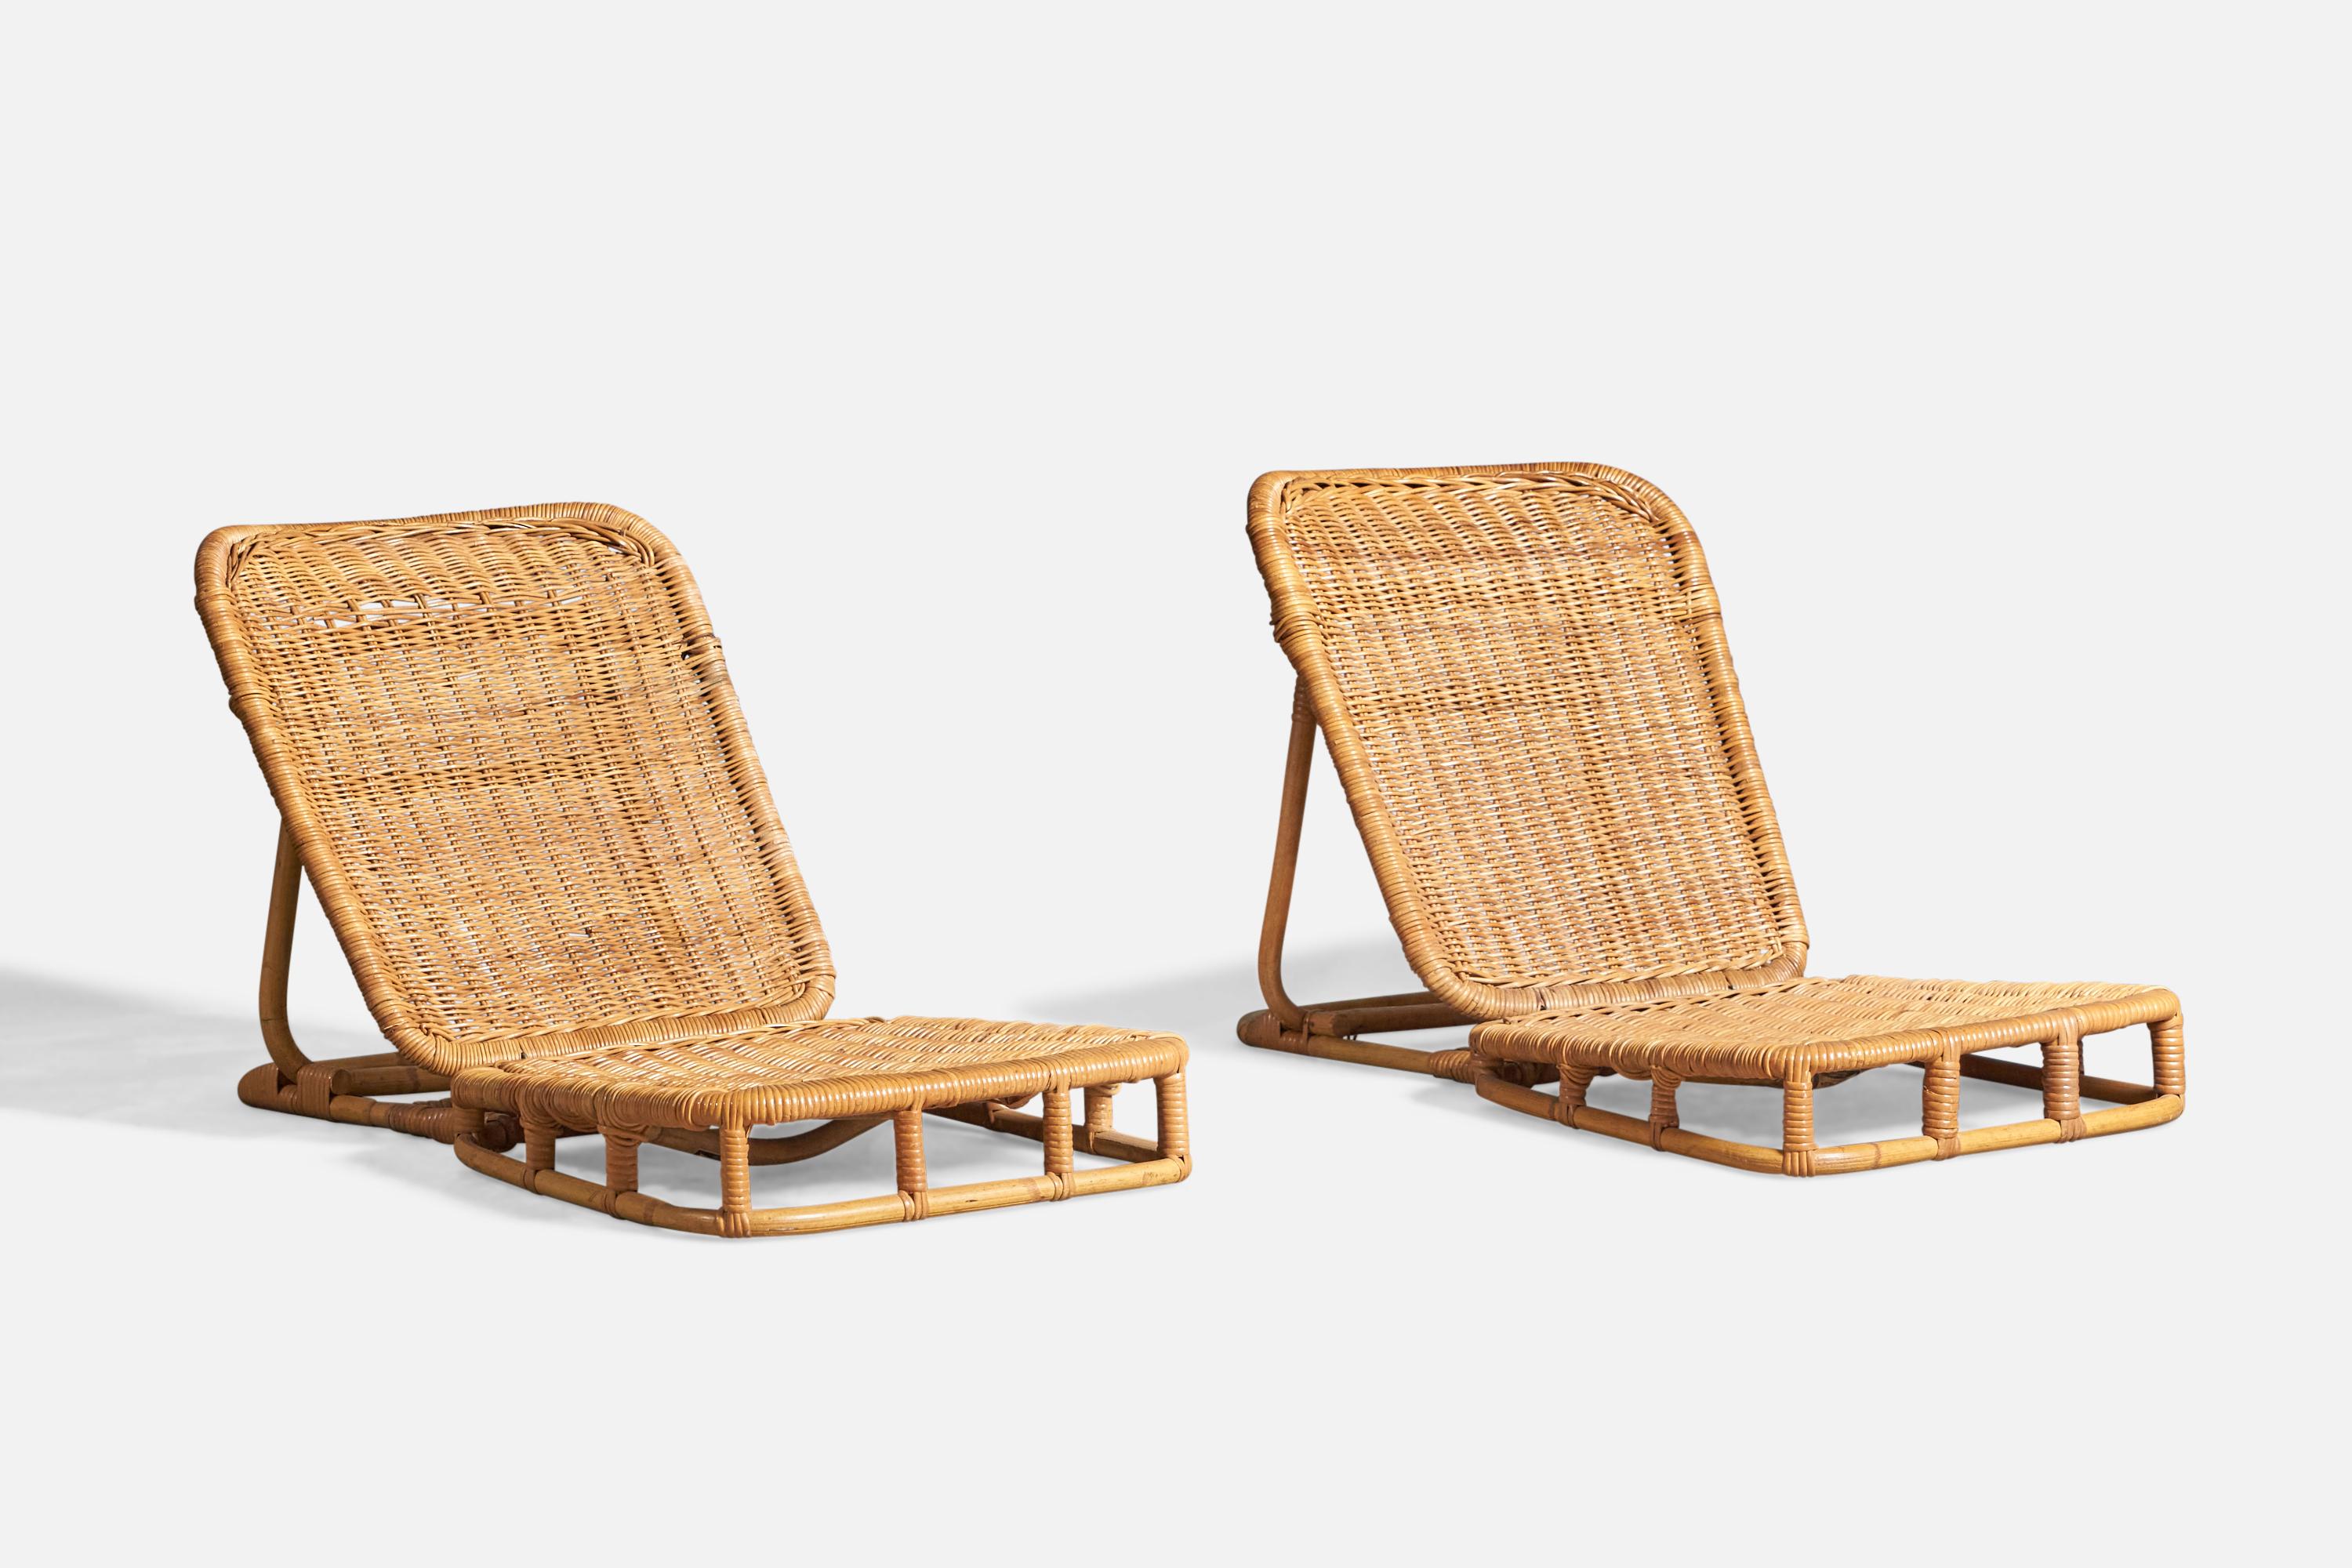 A pair of foldable rattan and bamboo low folding lounge chairs, designed and produced by Calif-Asia, USA, c. 1950s.
